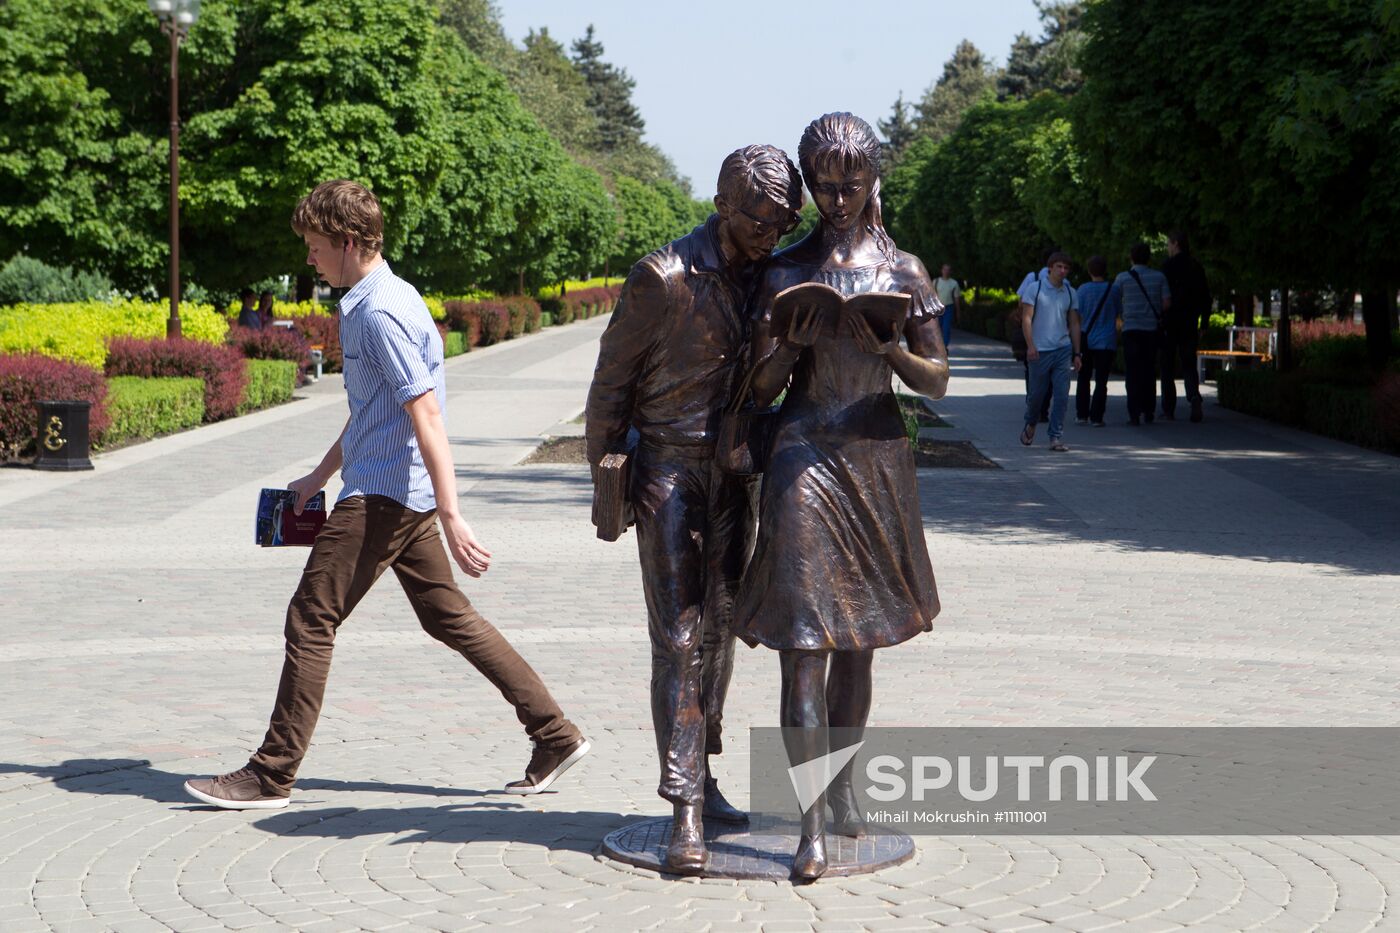 Monument to students opened in Krasnodar